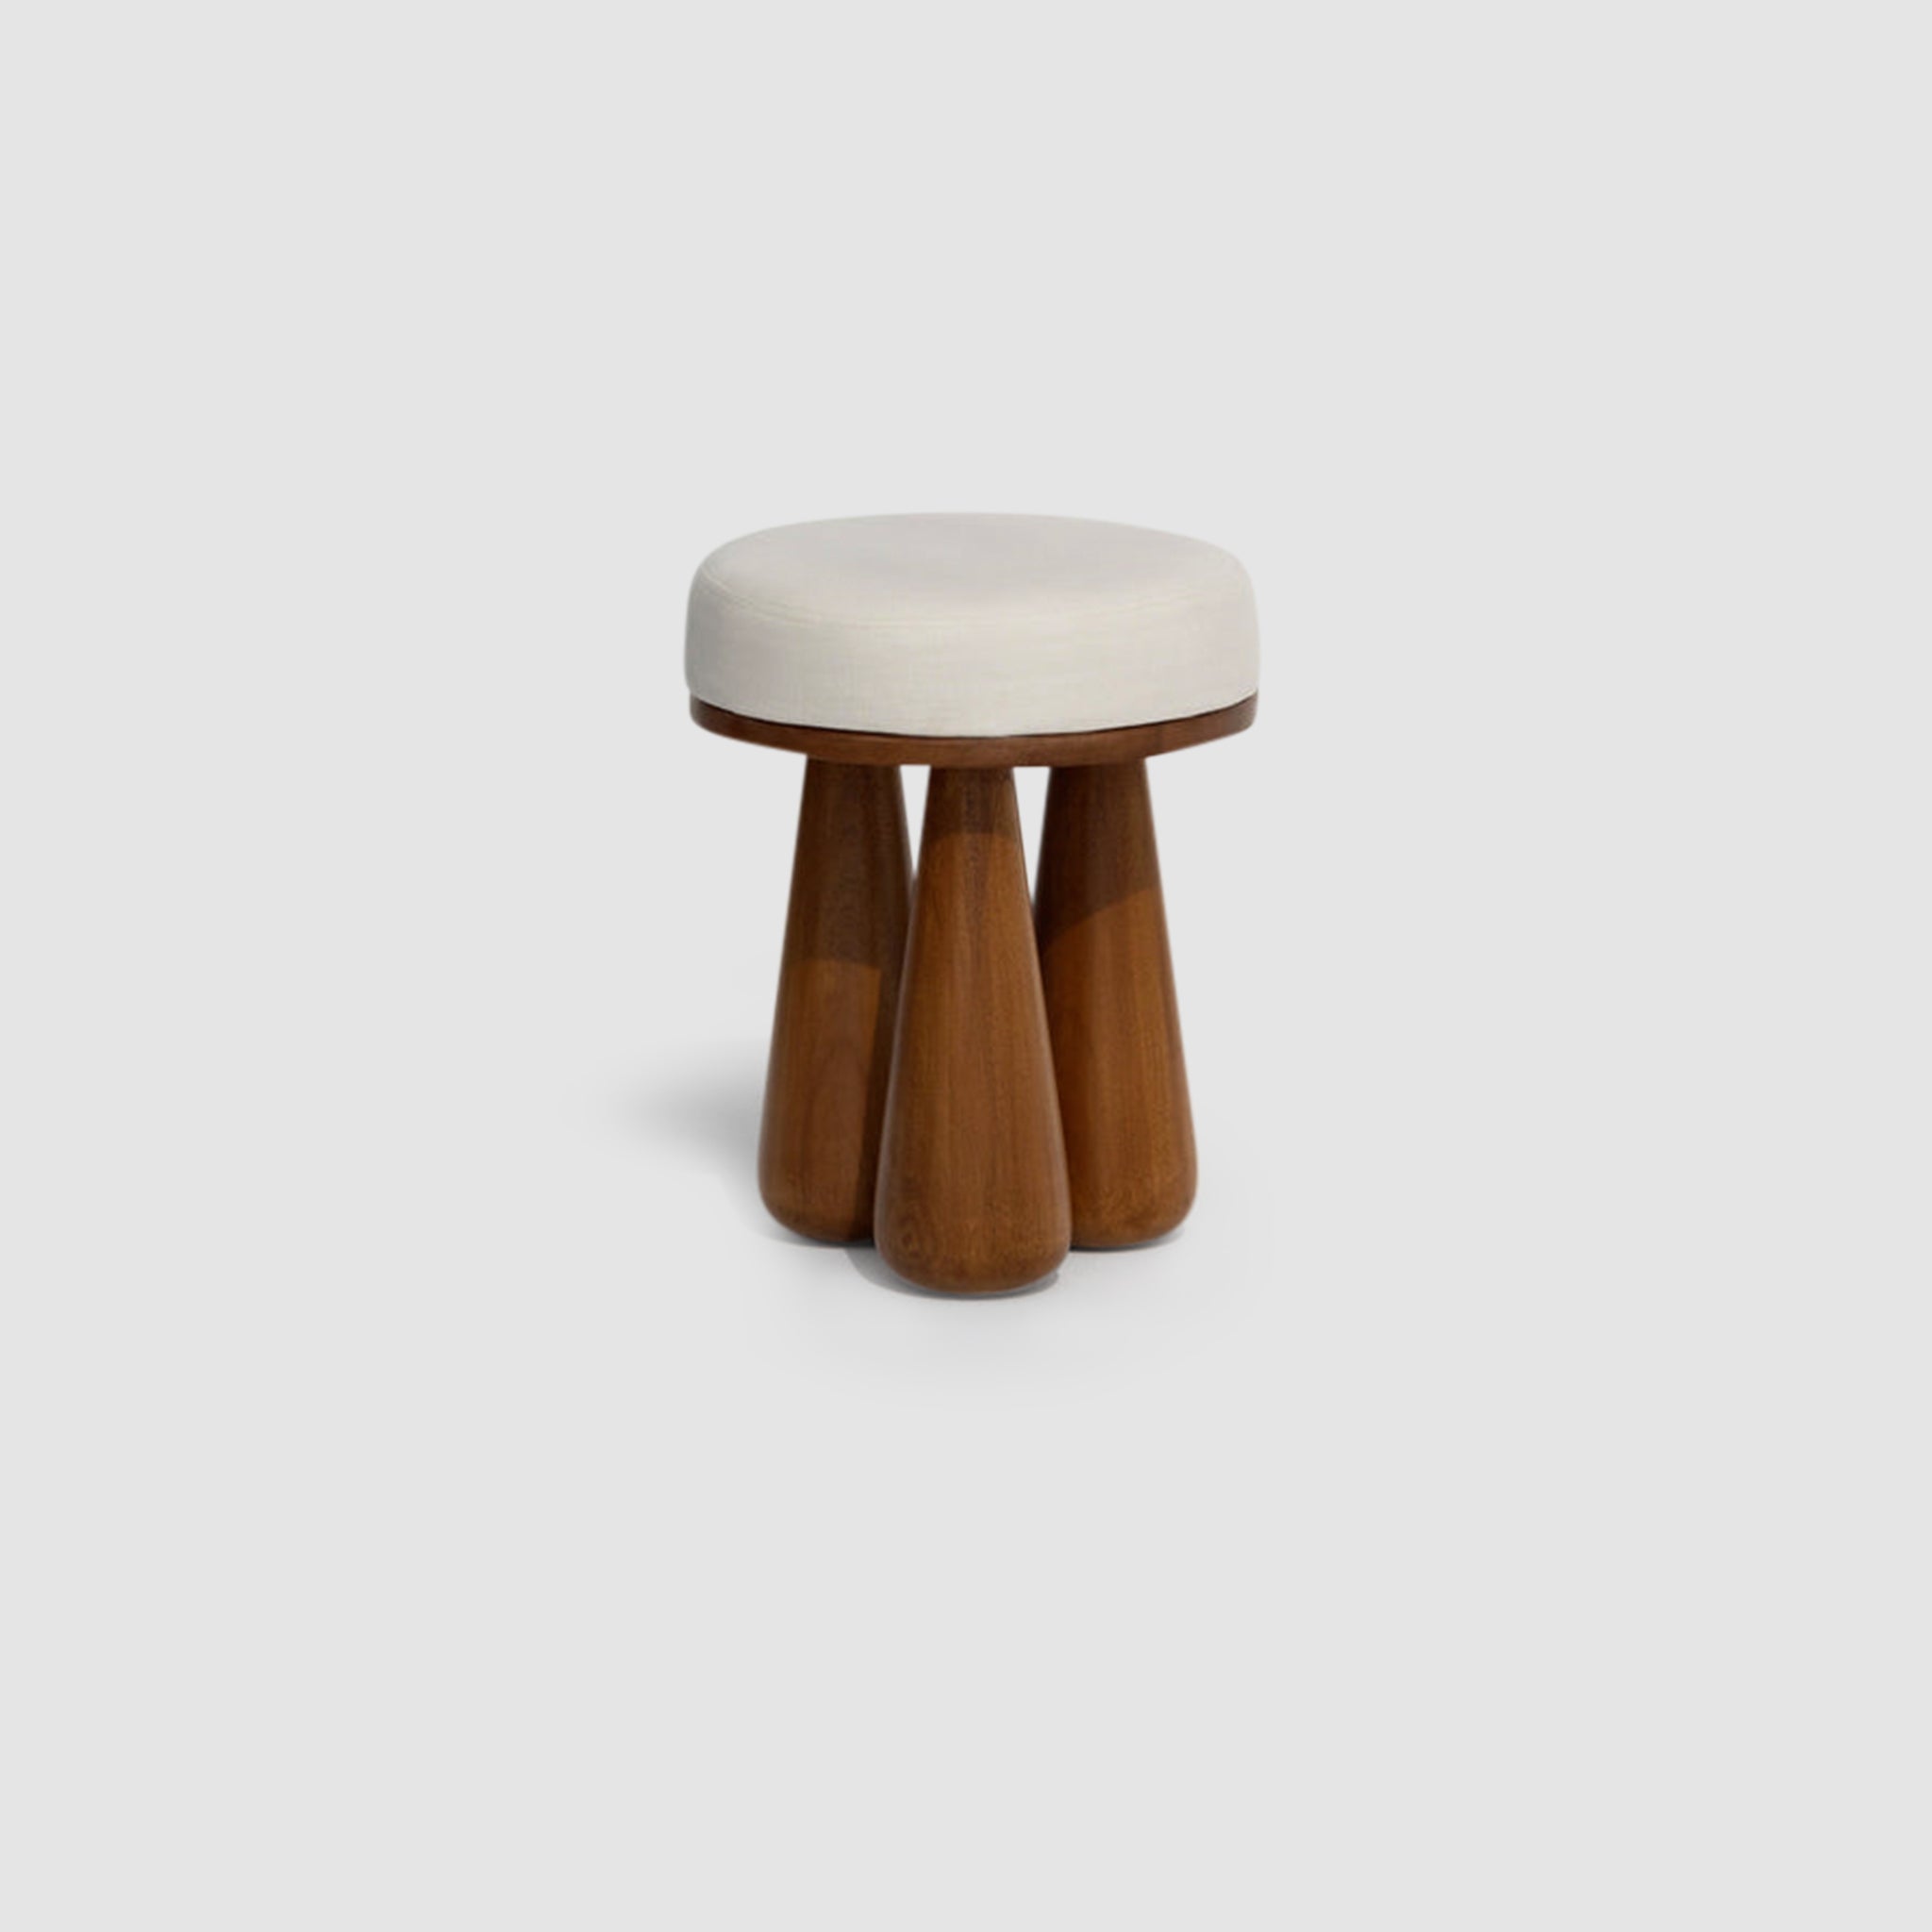 Wooden stool with chunky, tapered legs and a round, upholstered seat in white fabric